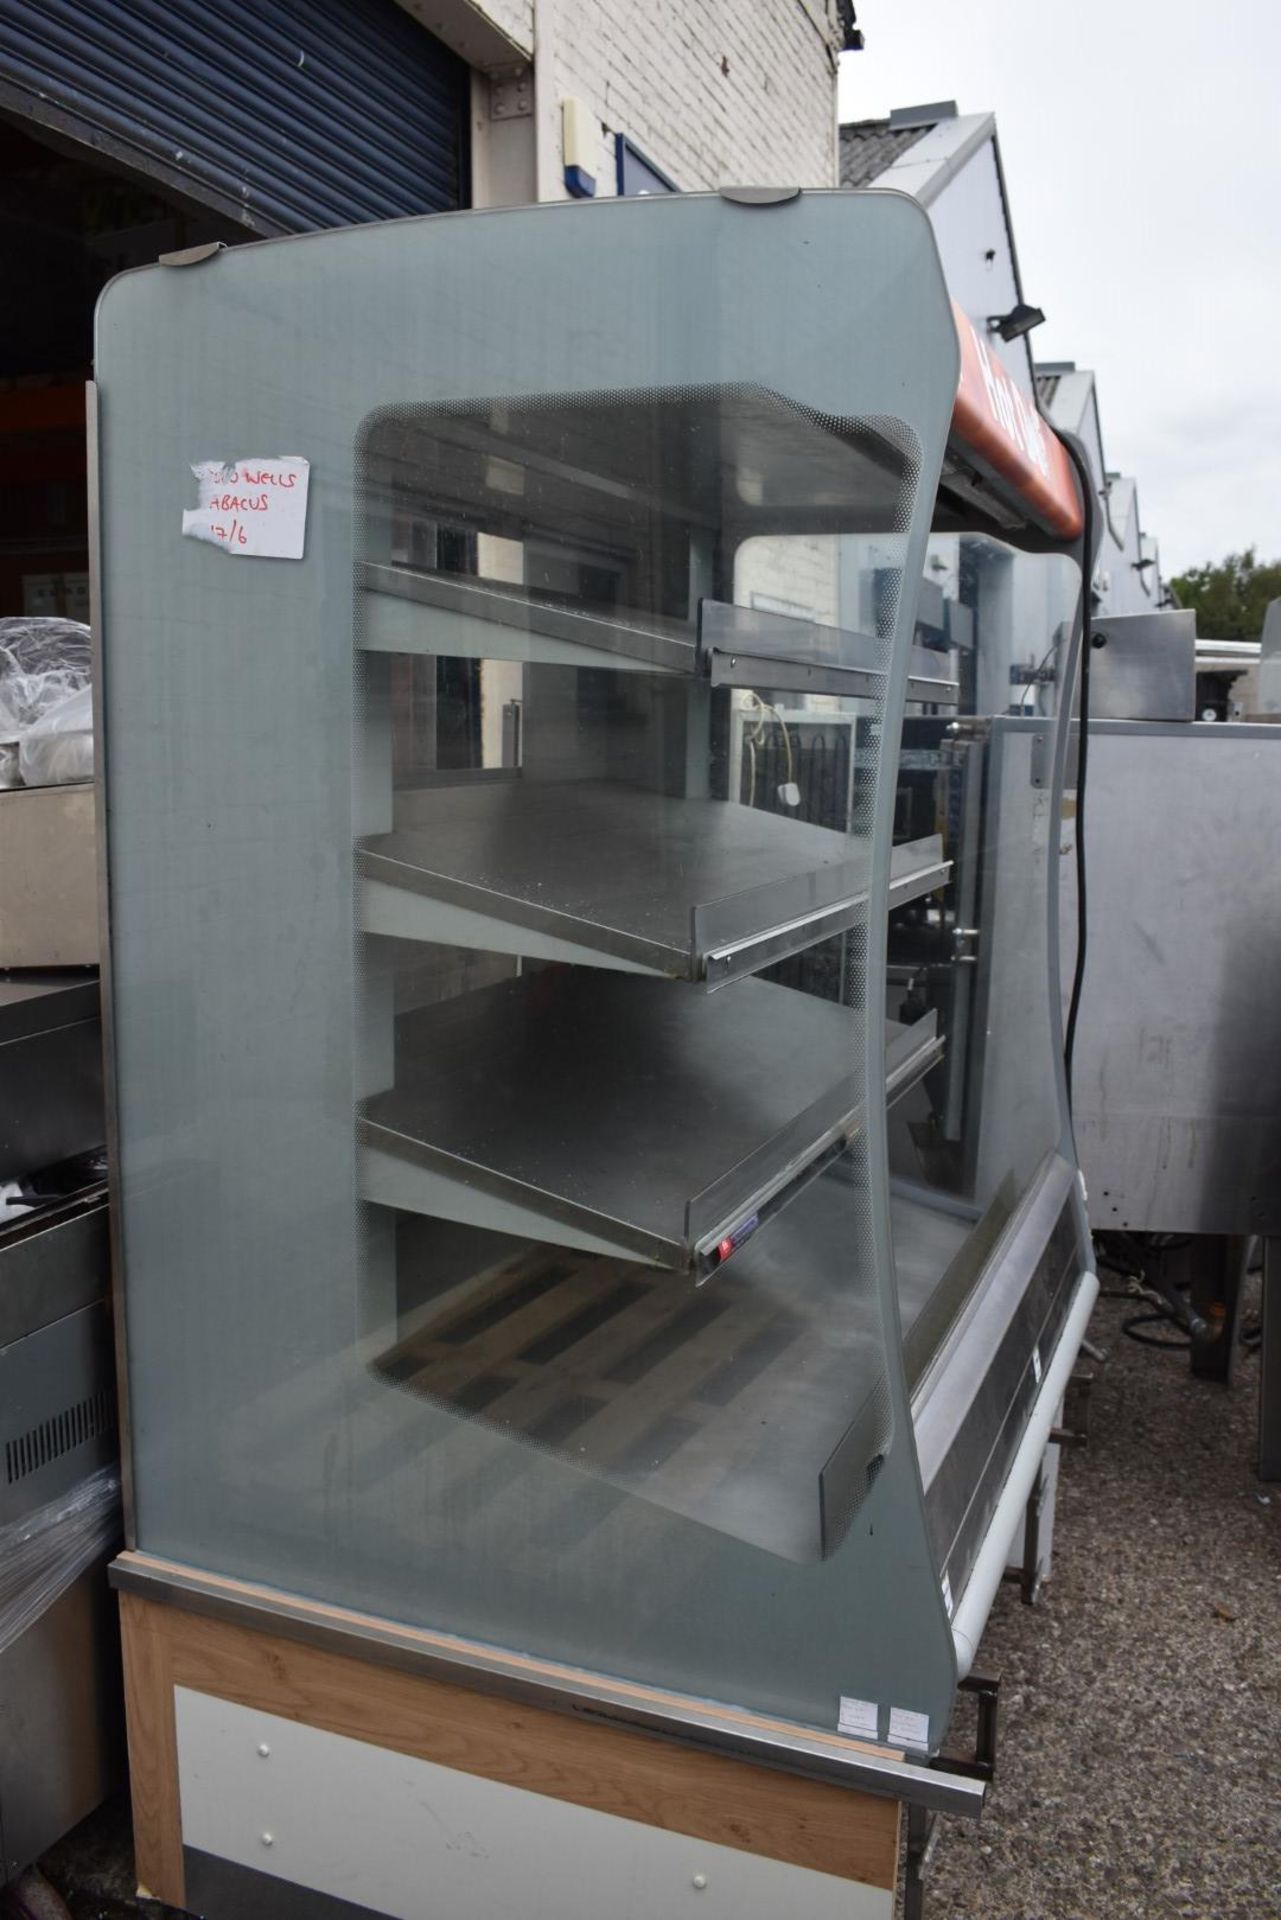 3 x BBQ King BKI MHC4 Hot Multi-tier Display Case/Heated Merchandiser Display Units With Rear Access - Image 8 of 10